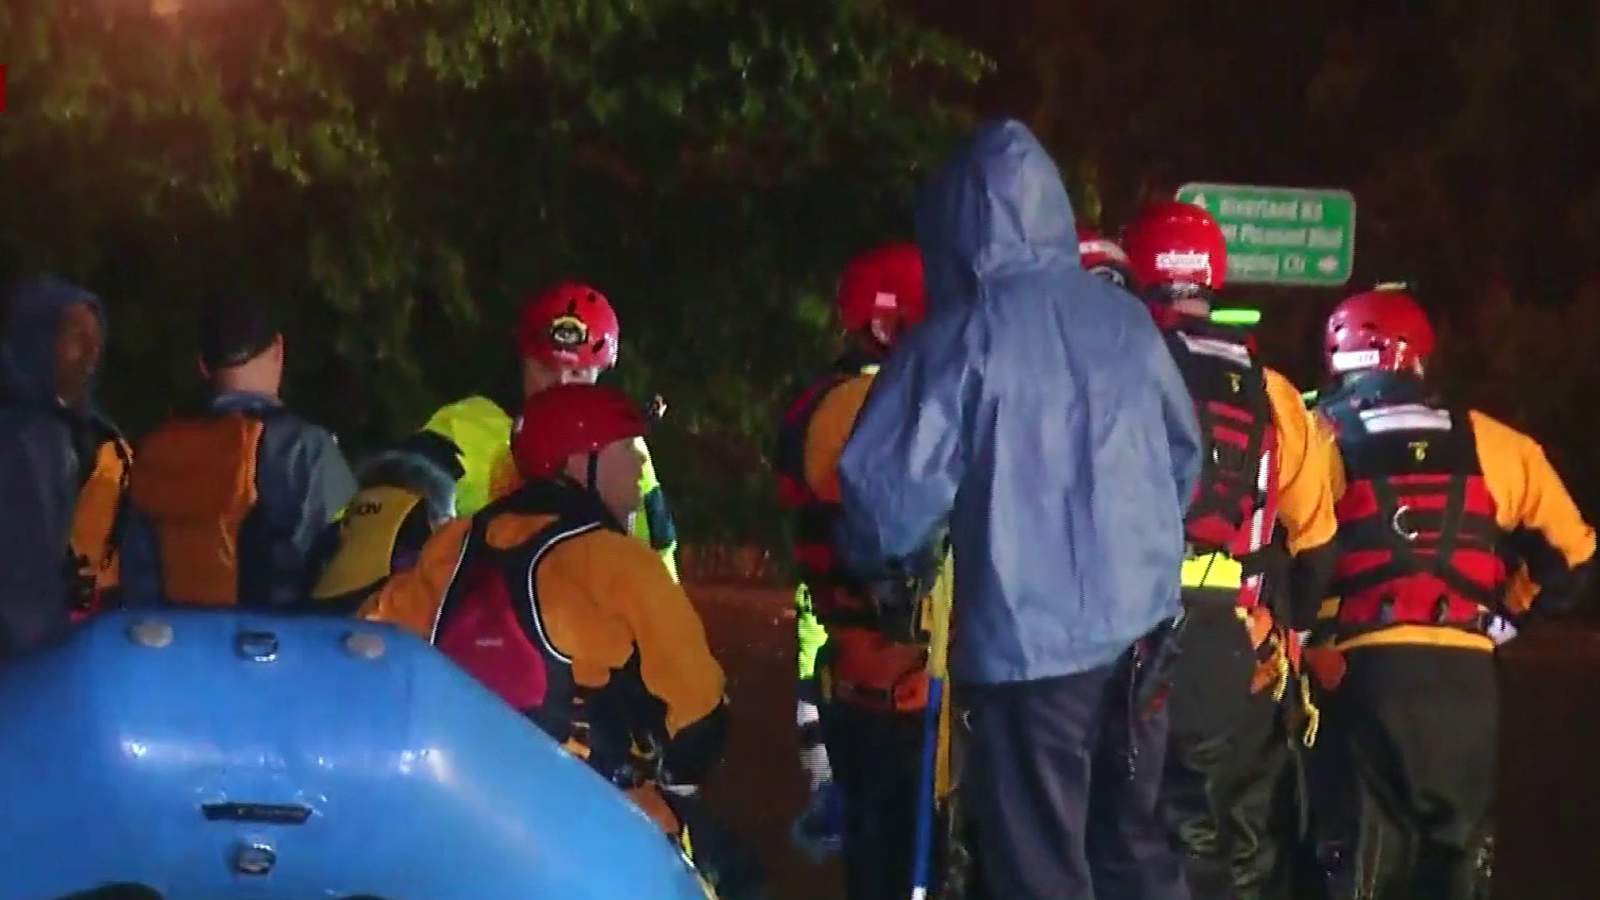 Swift-water crews rescue person from car in Roanoke